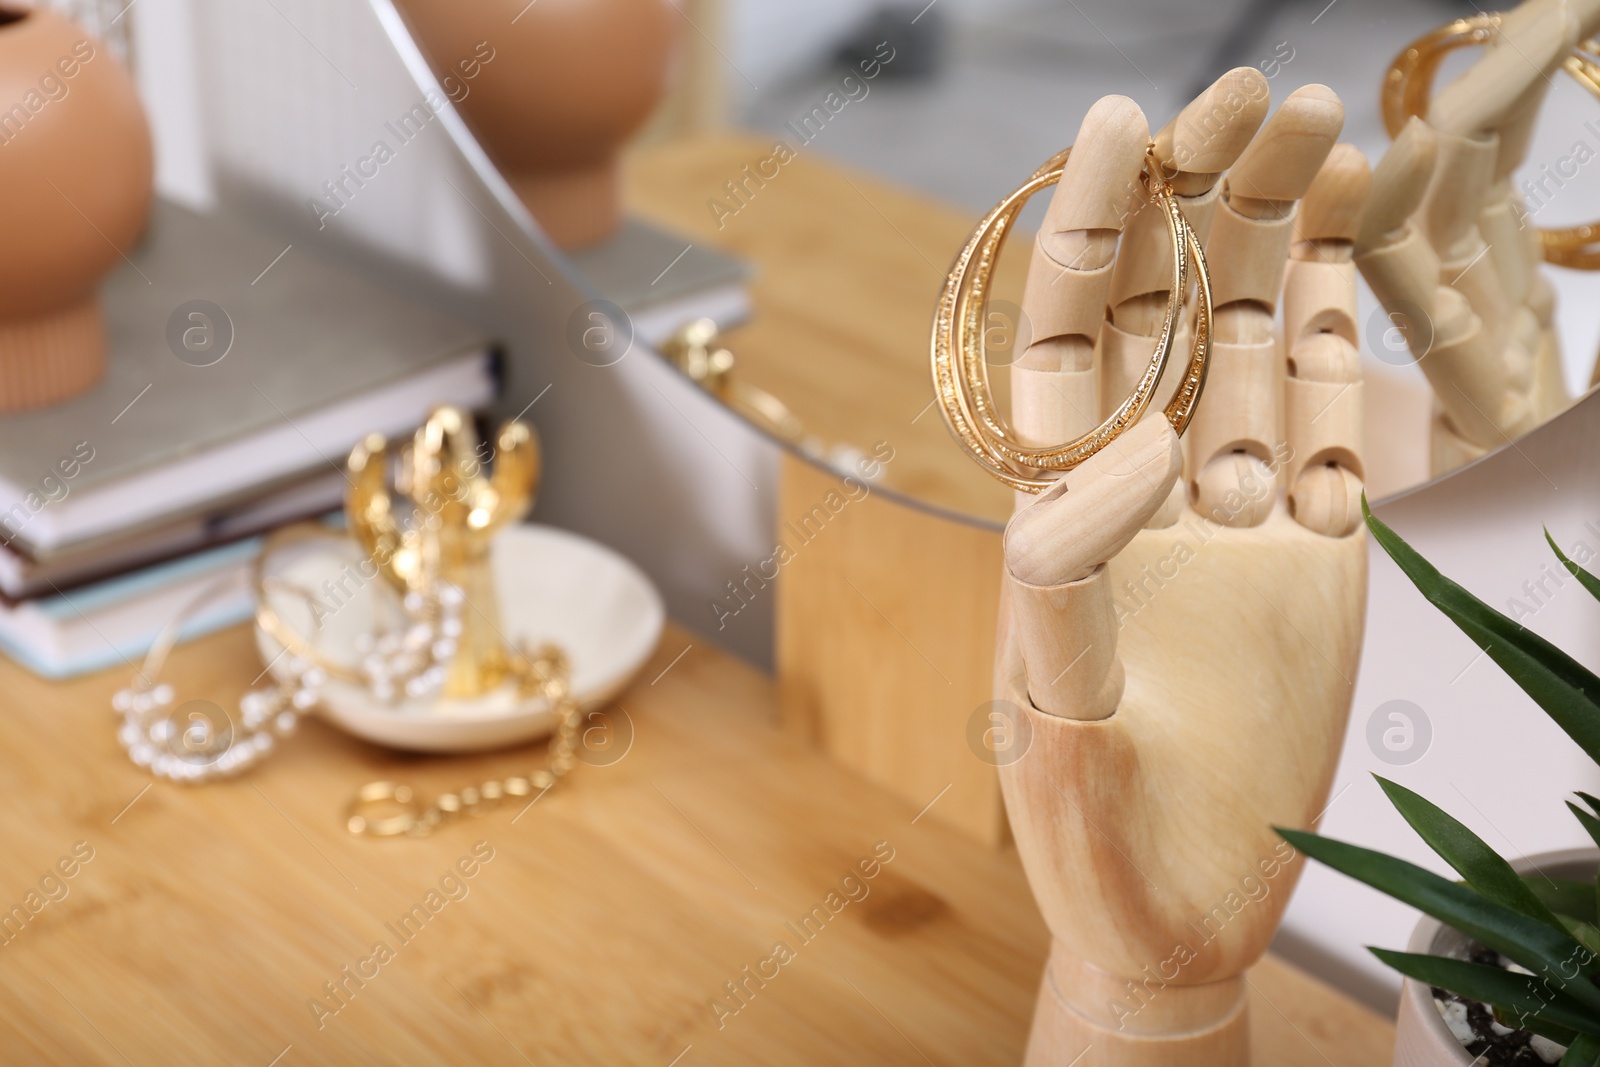 Photo of Decorative hand with earrings on wooden dressing table indoors. Space for text